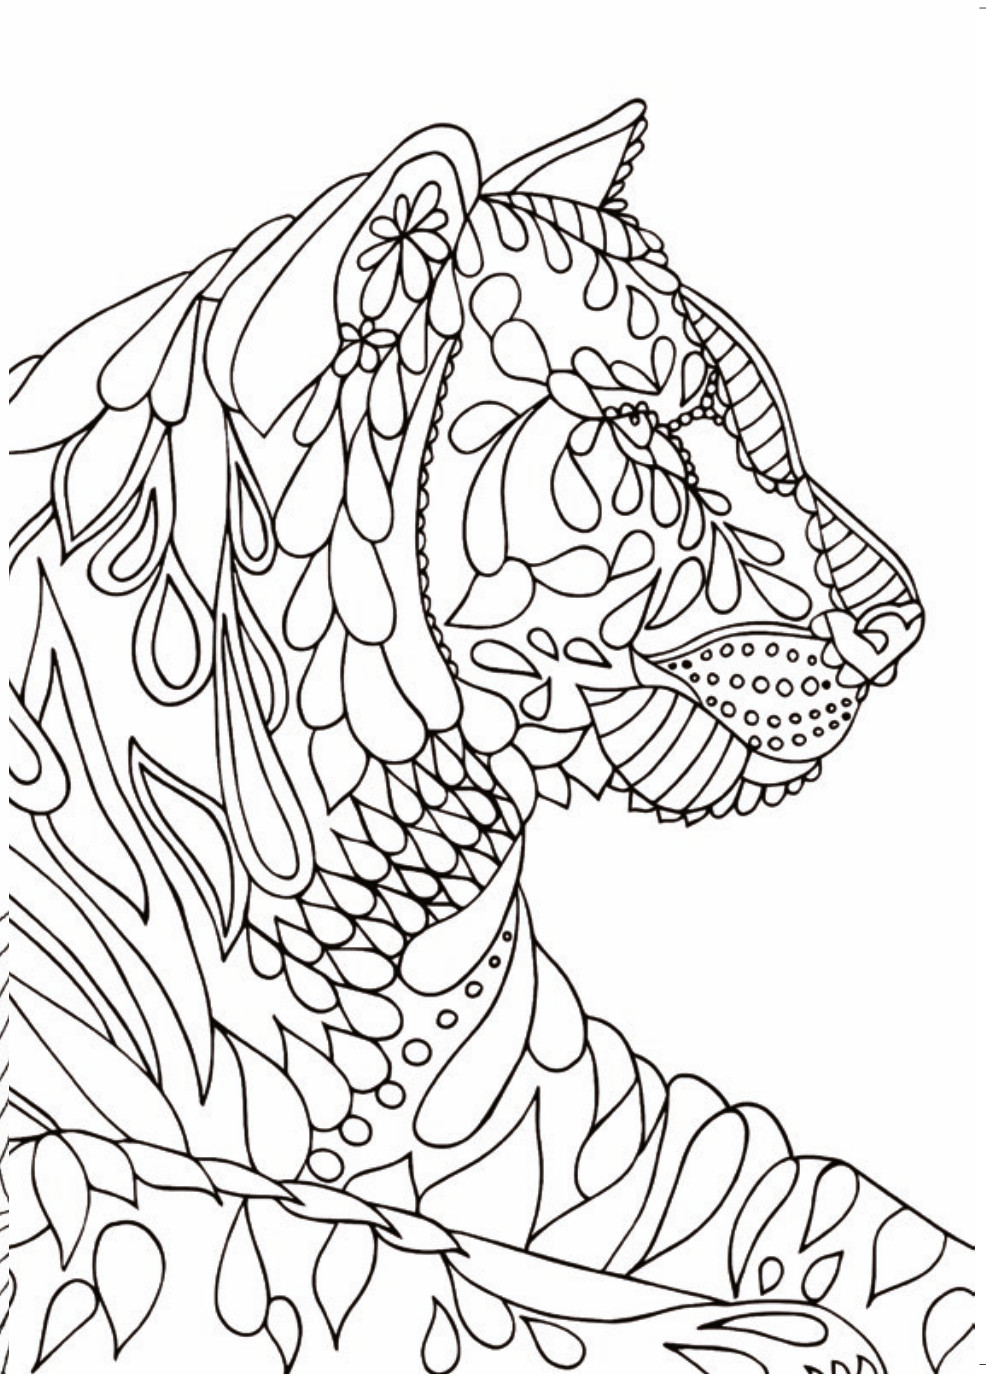 21-best-ideas-mindfulness-coloring-pages-for-kids-home-family-style-and-art-ideas